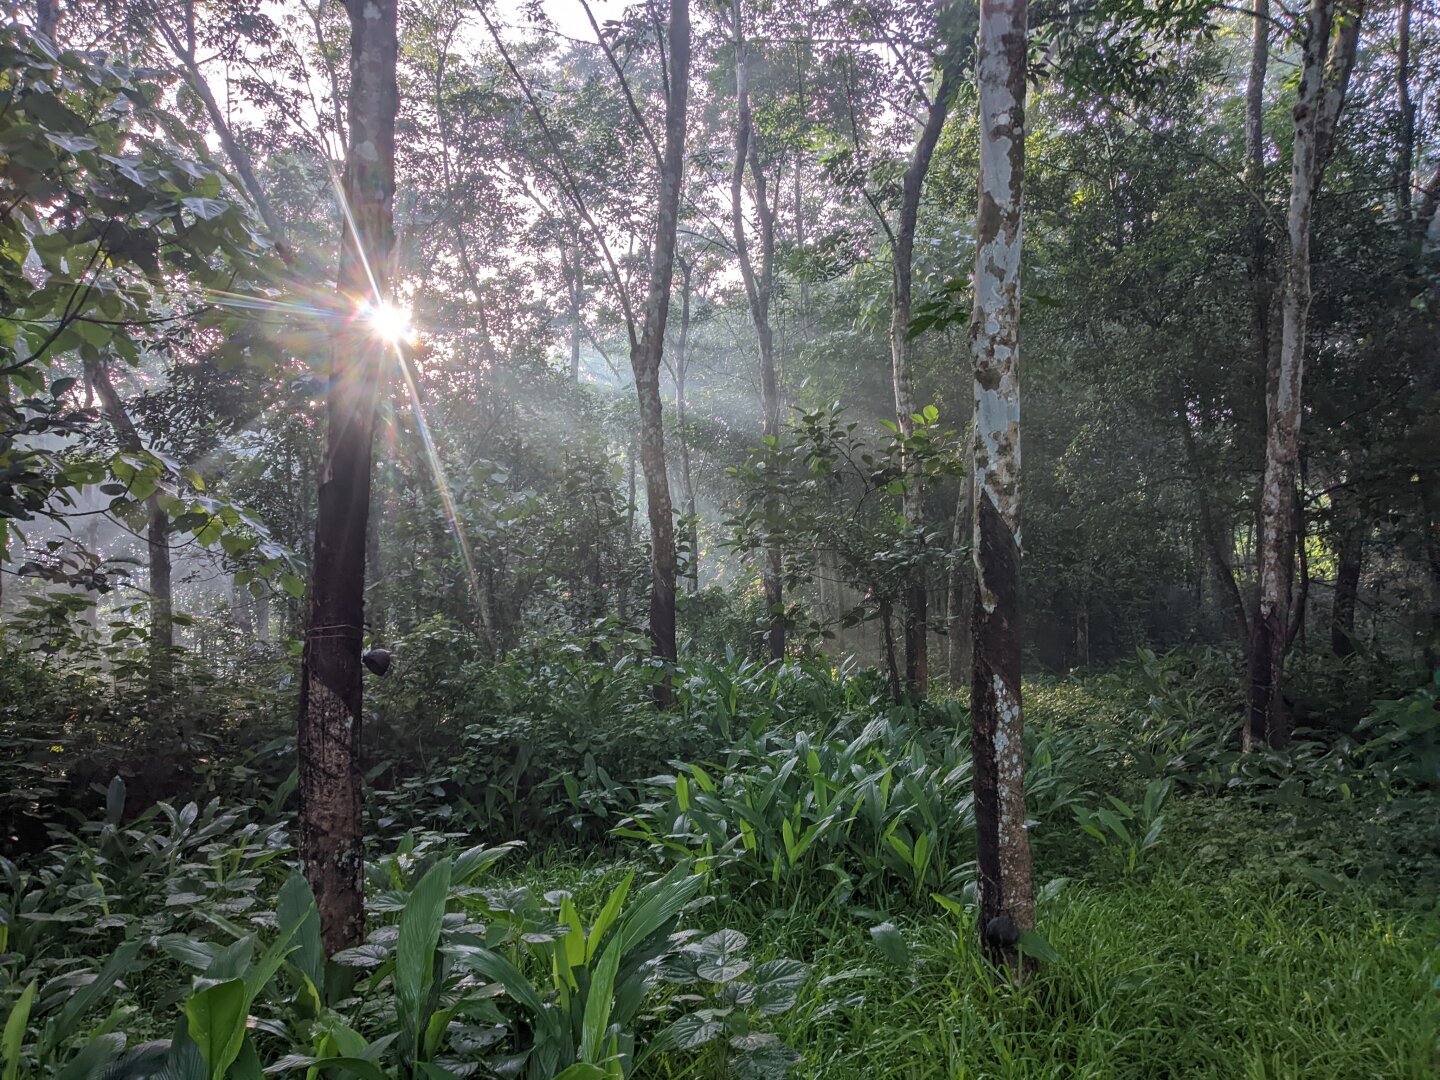 Sunlight causing a lens-flare; in a forest.